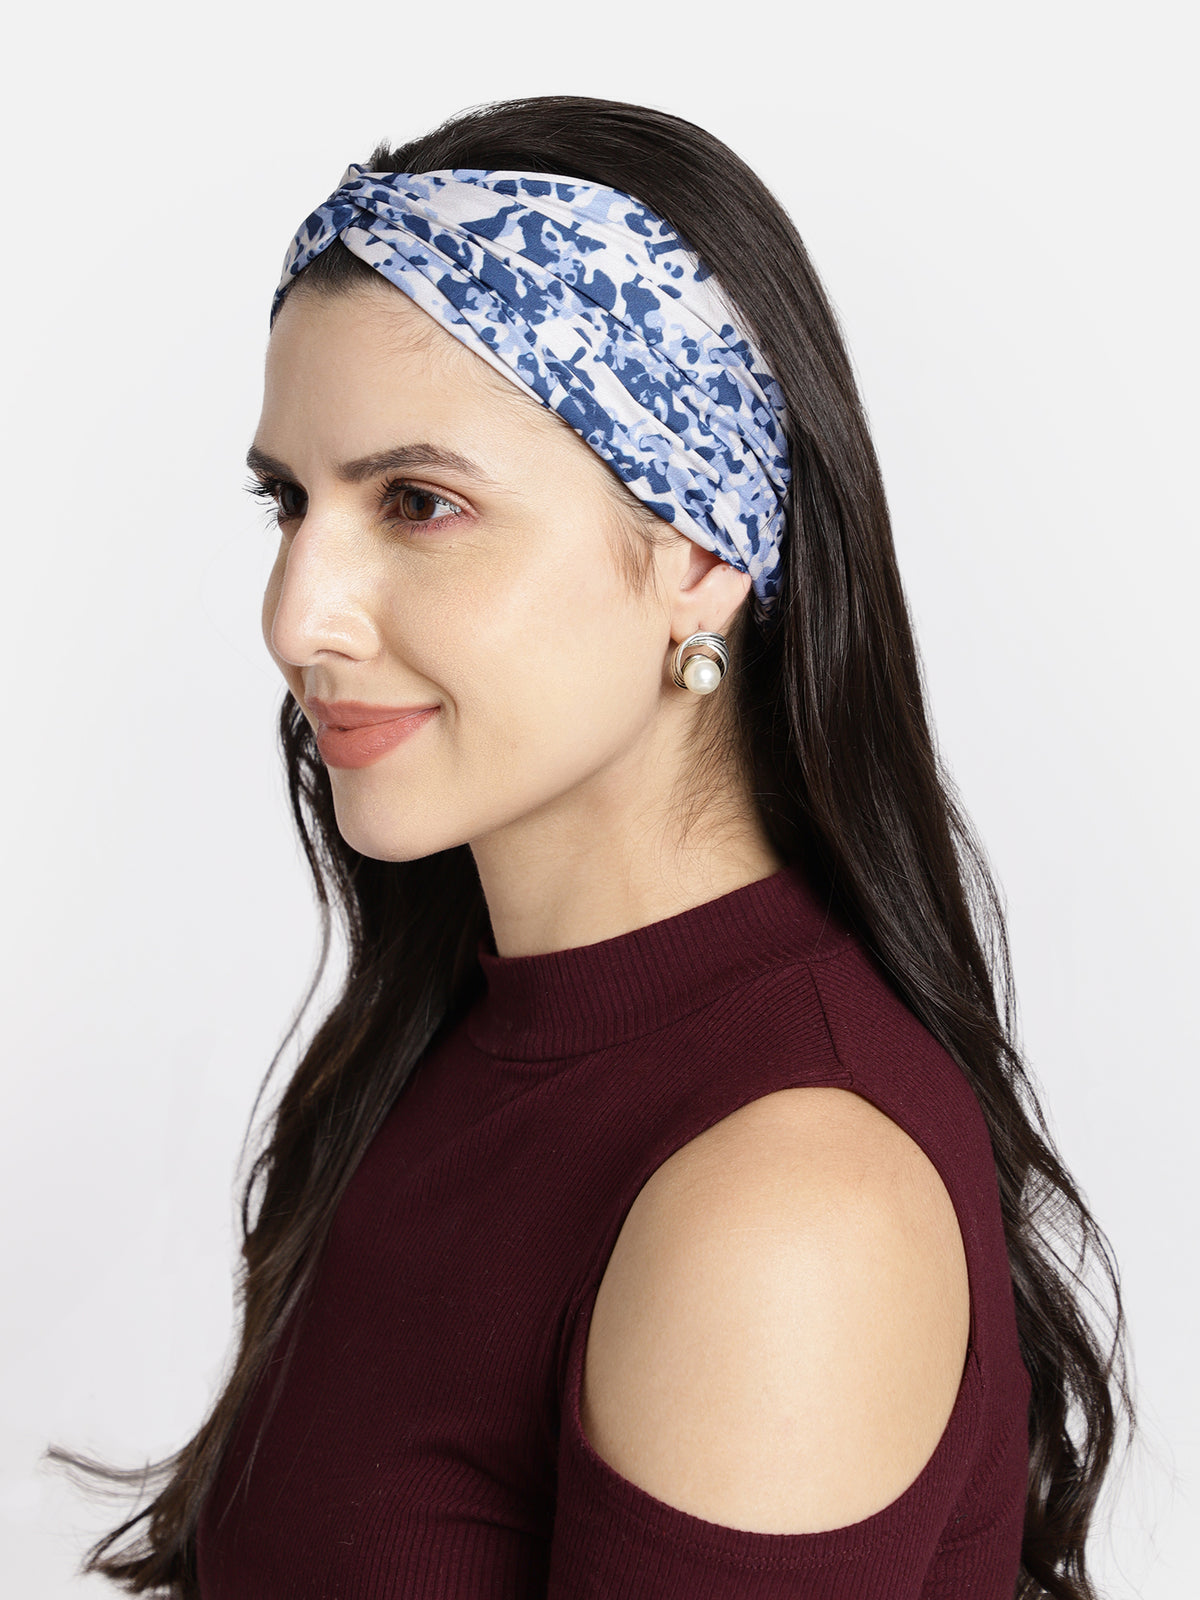 Off White Color Printed Headband and Scrunchy